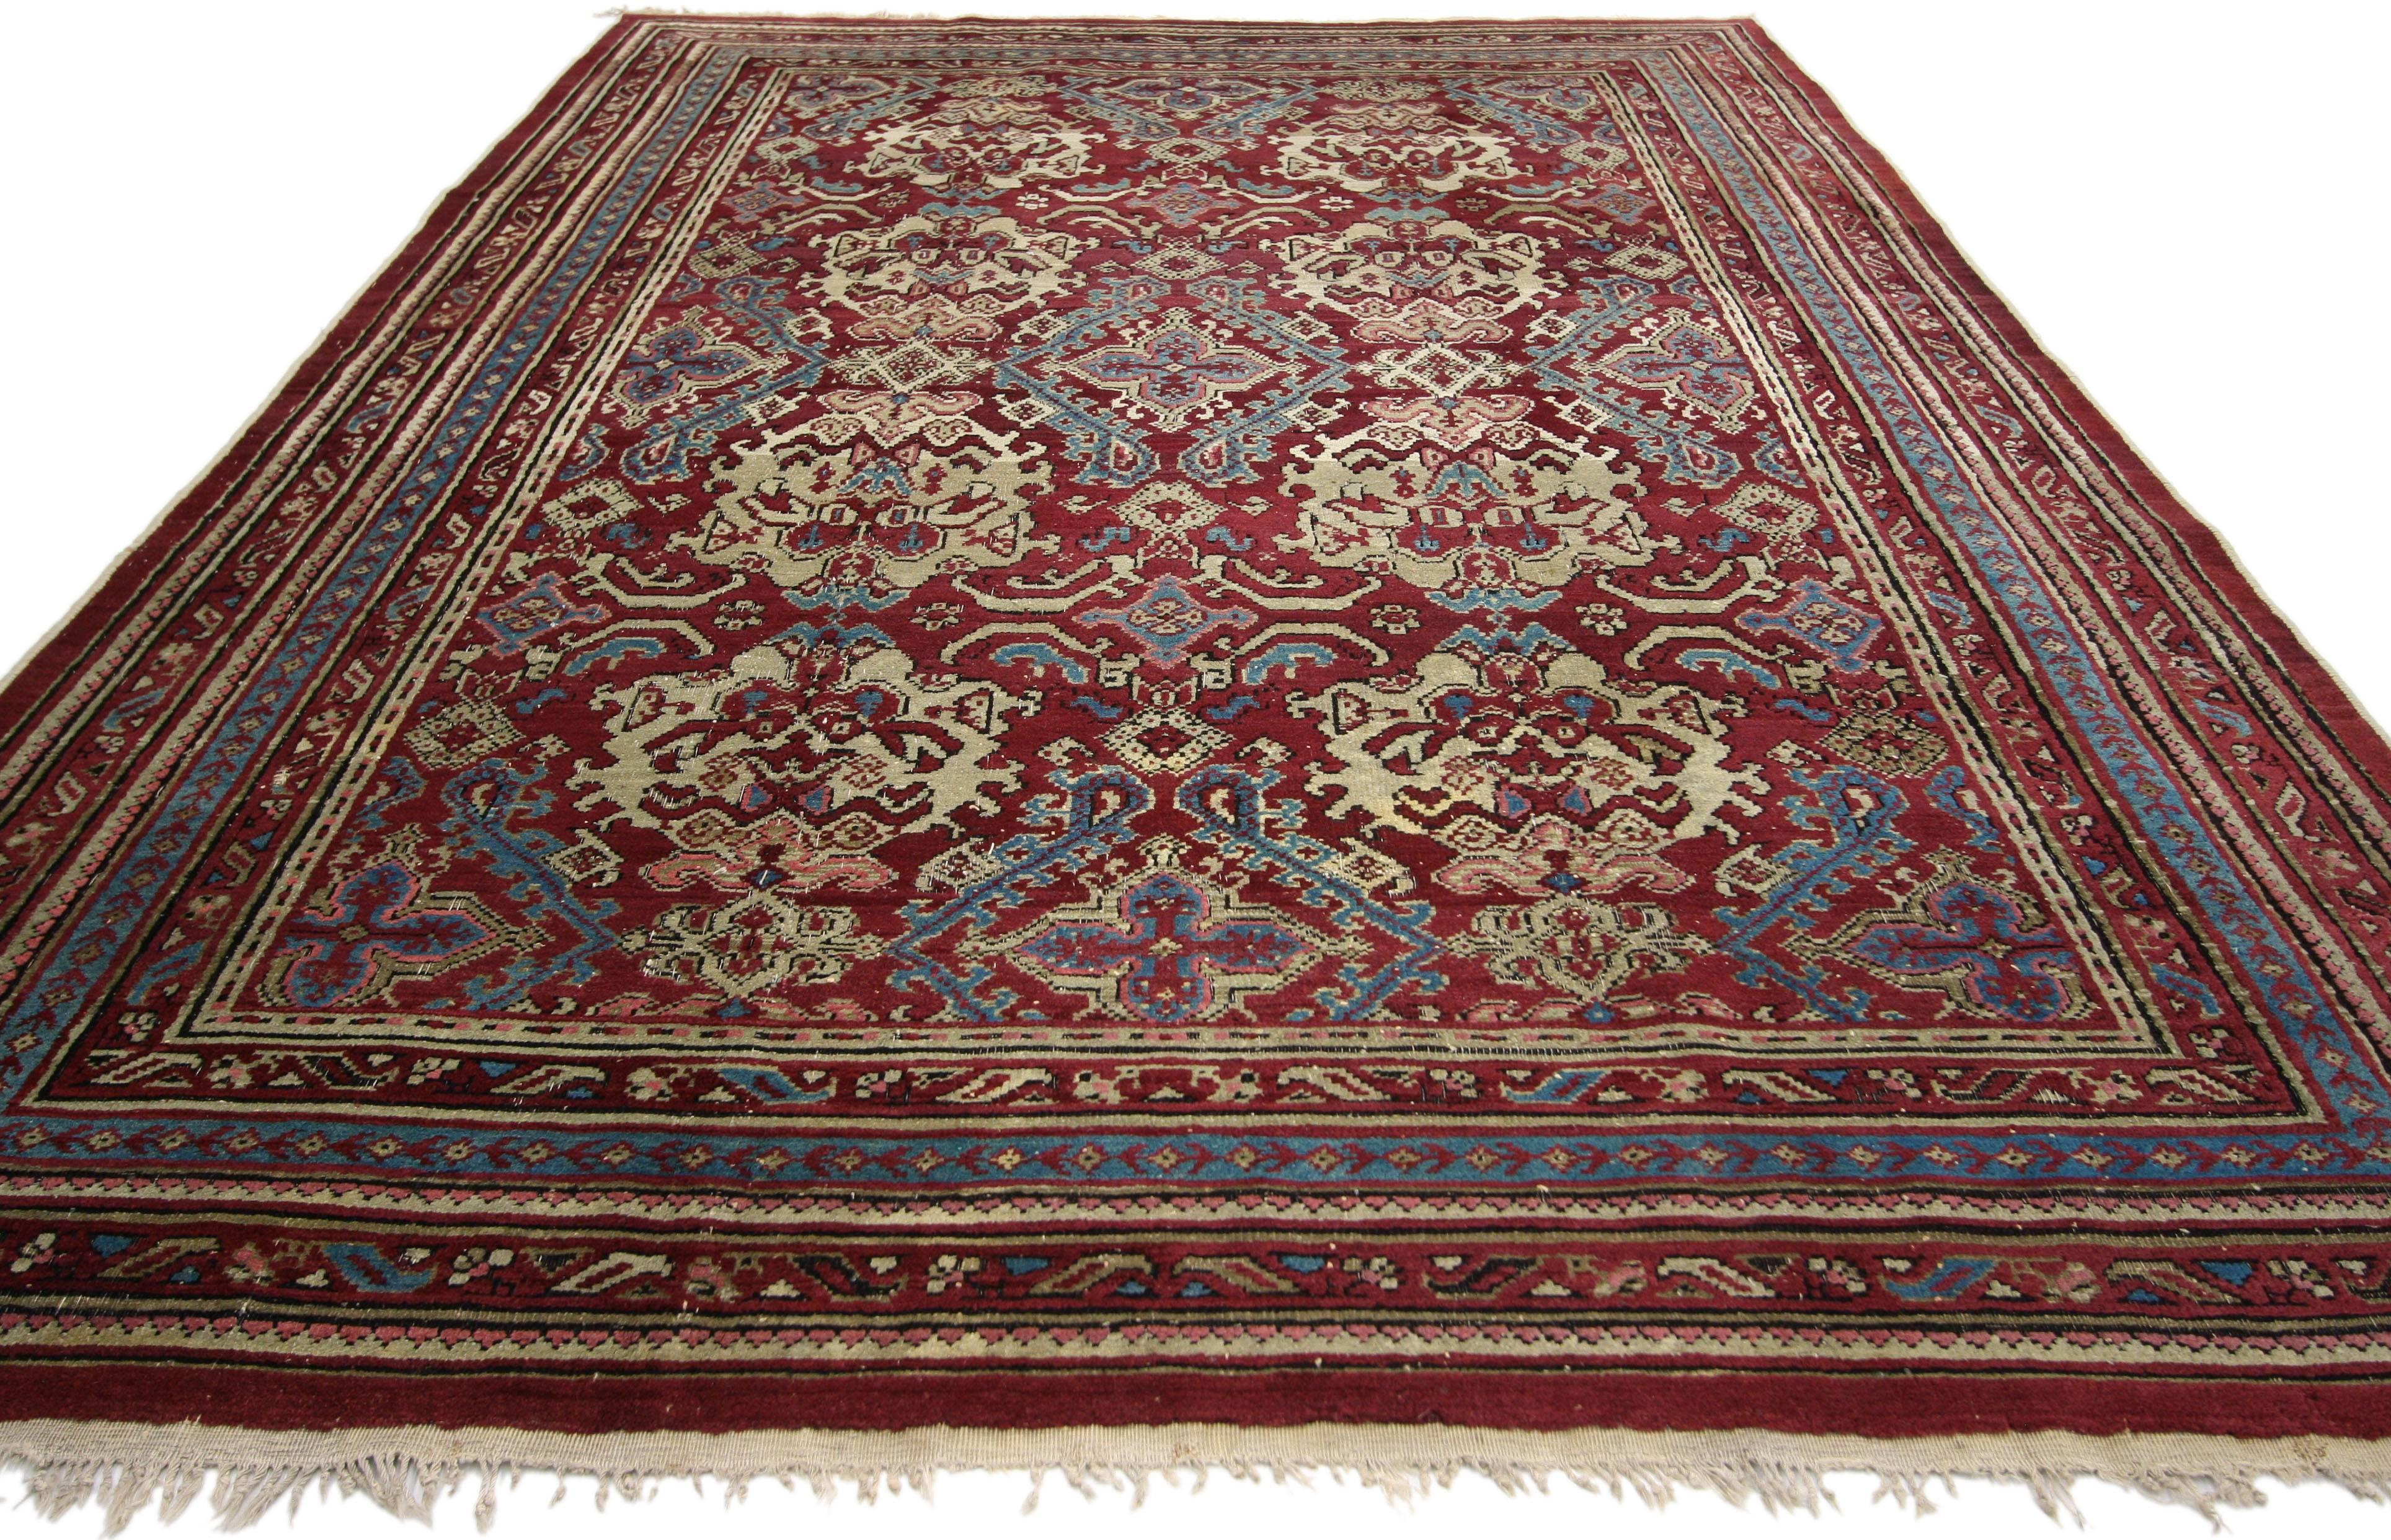 British Indian Ocean Territory 19th Century Antique Indian Agra Rug with Modern Design For Sale